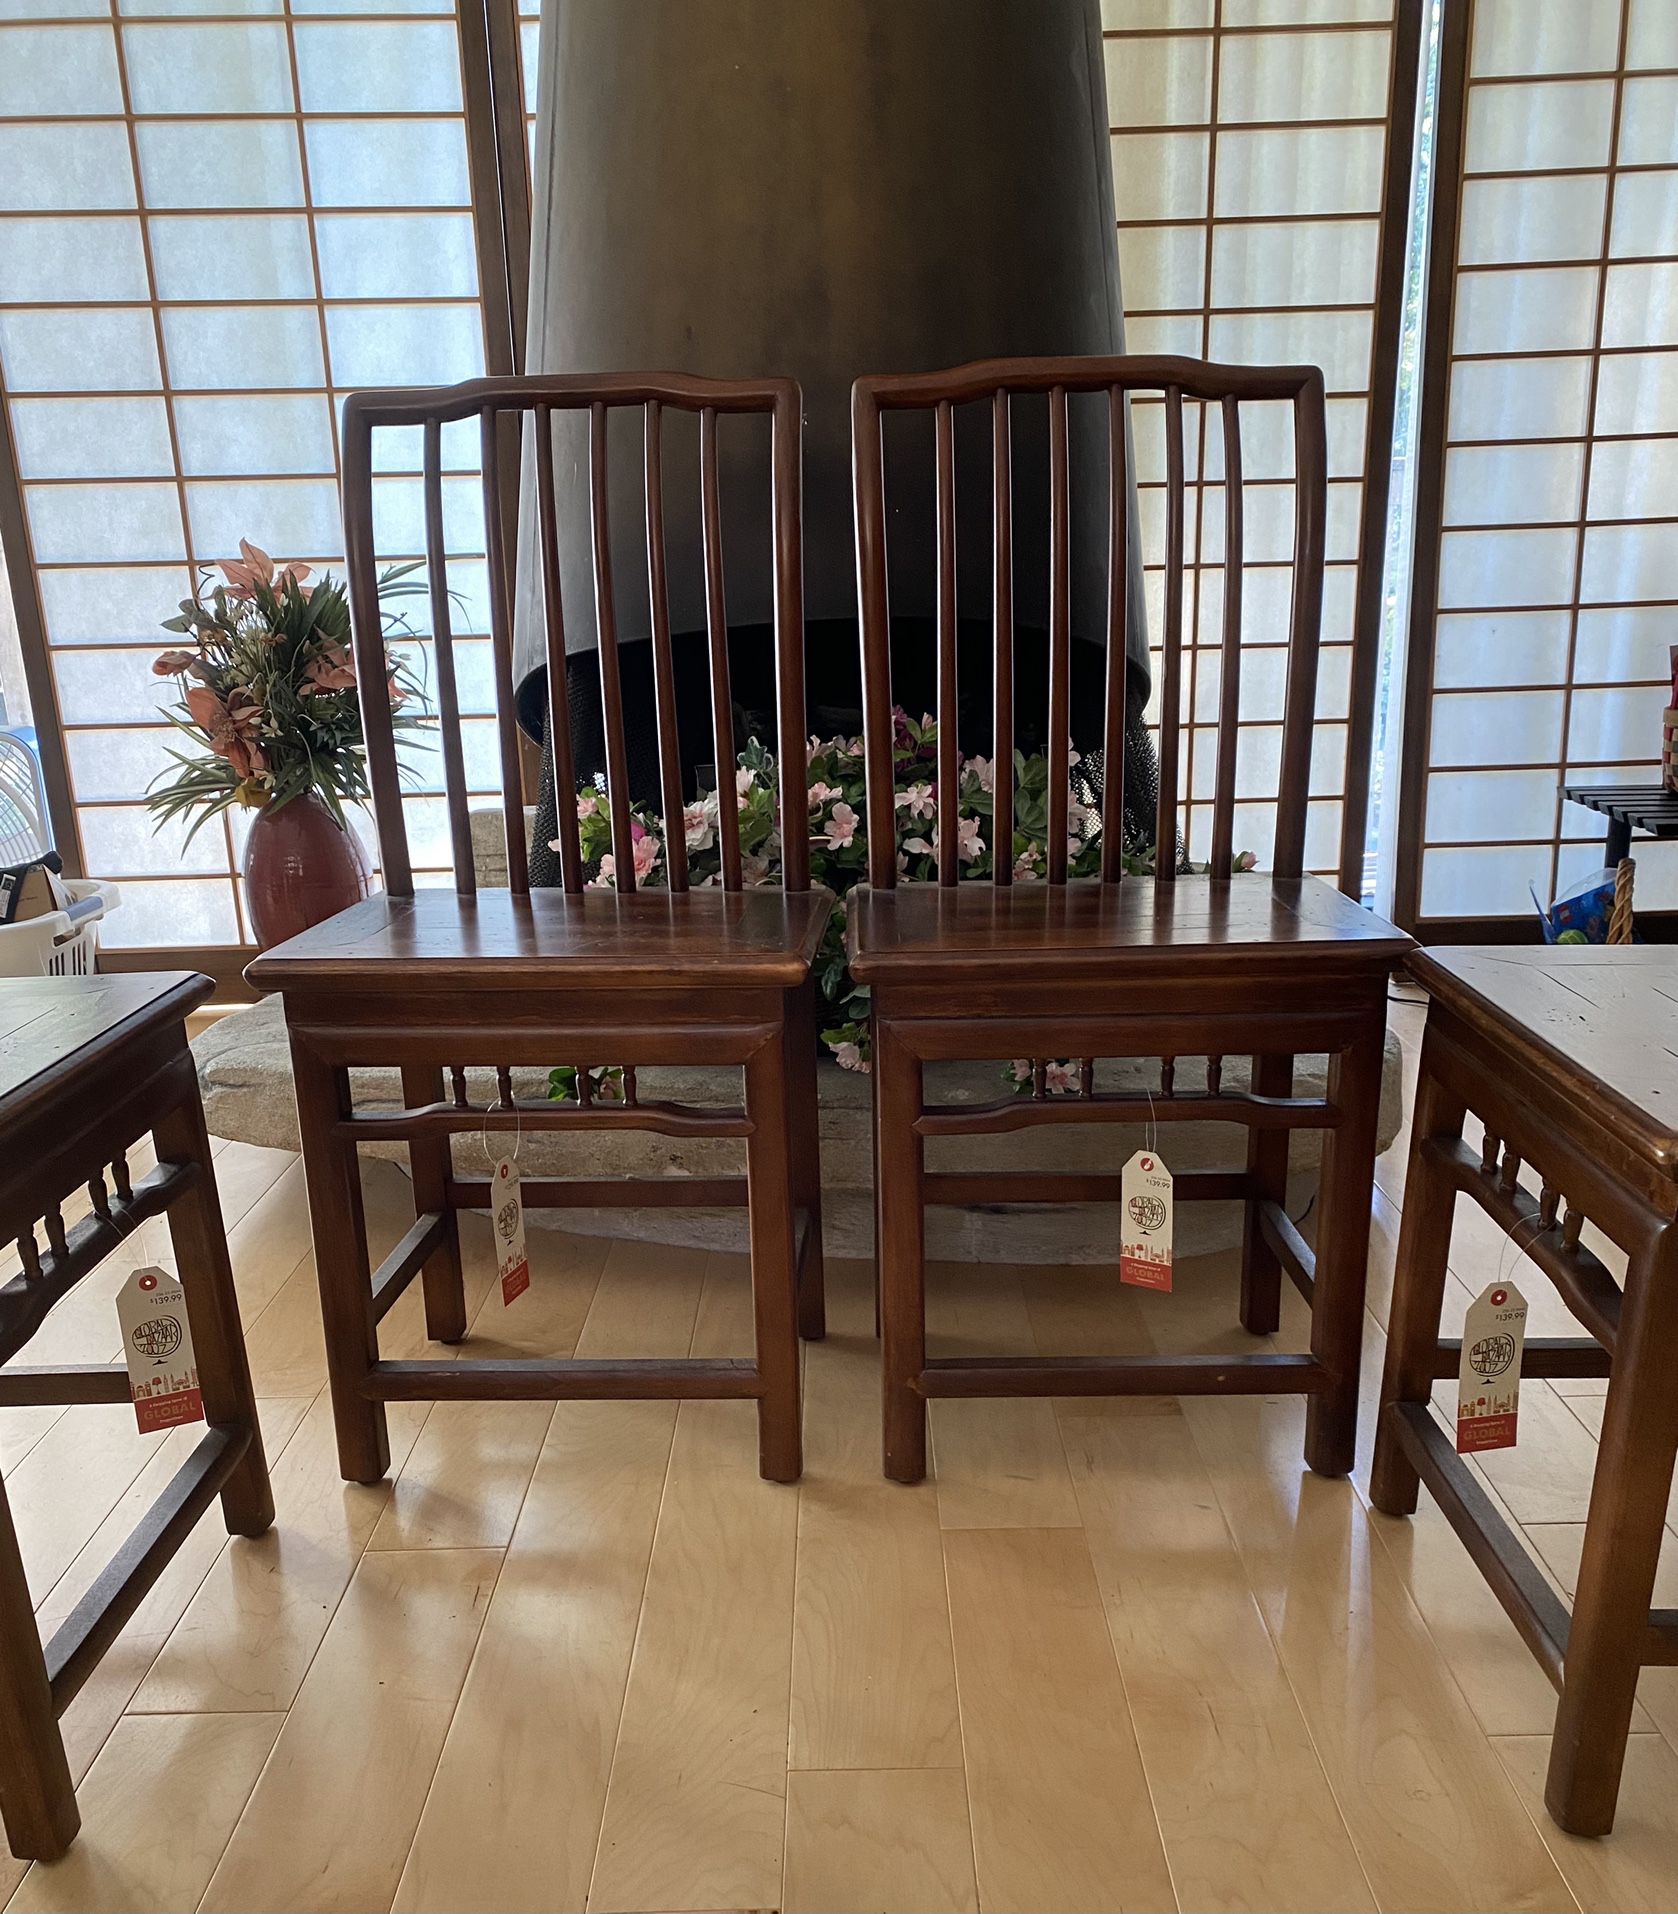 New Chinese style Dining Chairs Reg $139ea! Sell set for $120 or Best Offer!